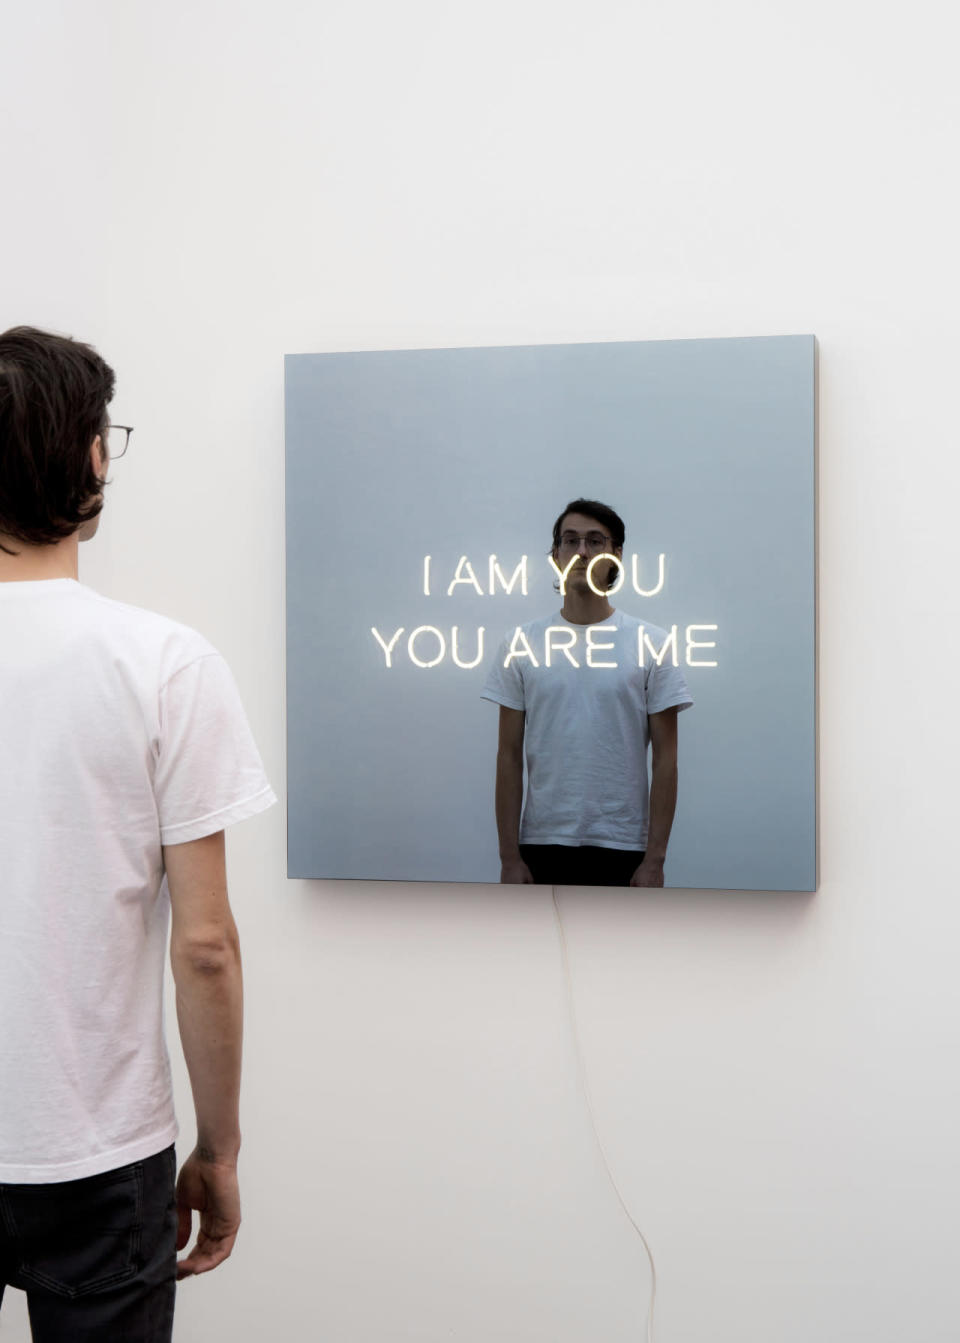 I am You, You Are Me (2015) by Jeppe Hein (c. König Galerie). On view at Frieze London. Price upon request.